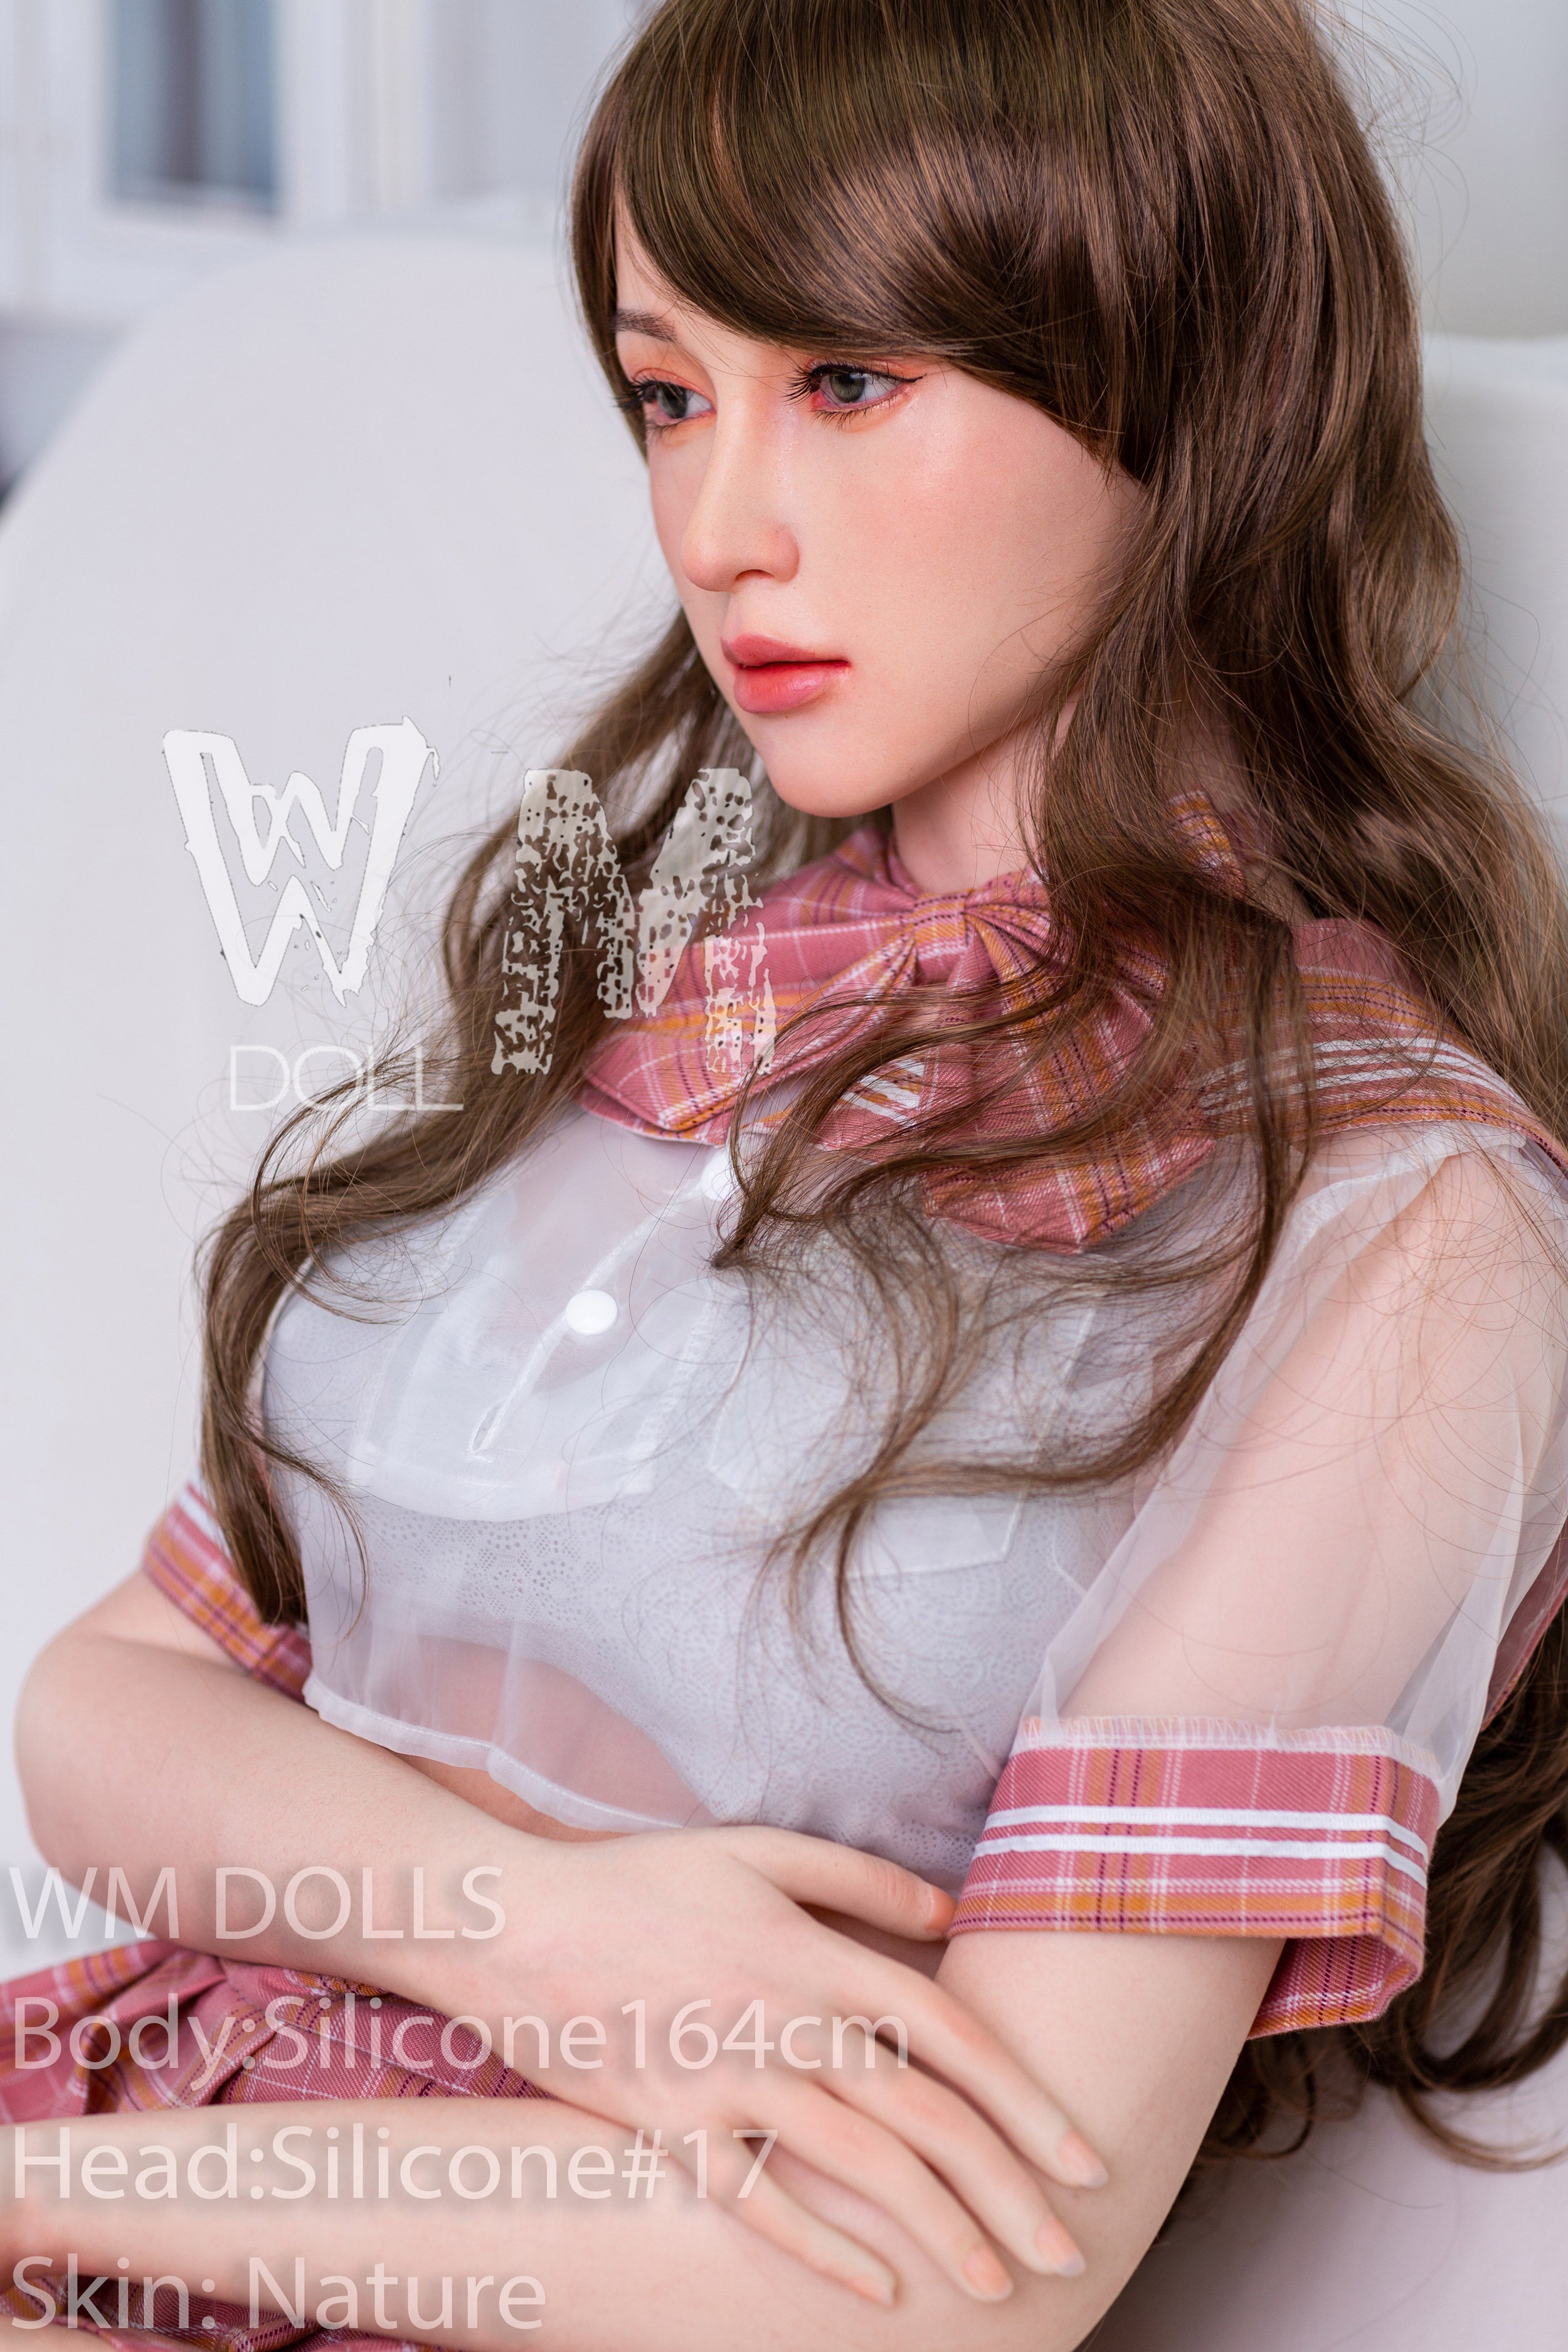 WM Doll 164 cm D Silicone - Juliette | Buy Sex Dolls at DOLLS ACTUALLY